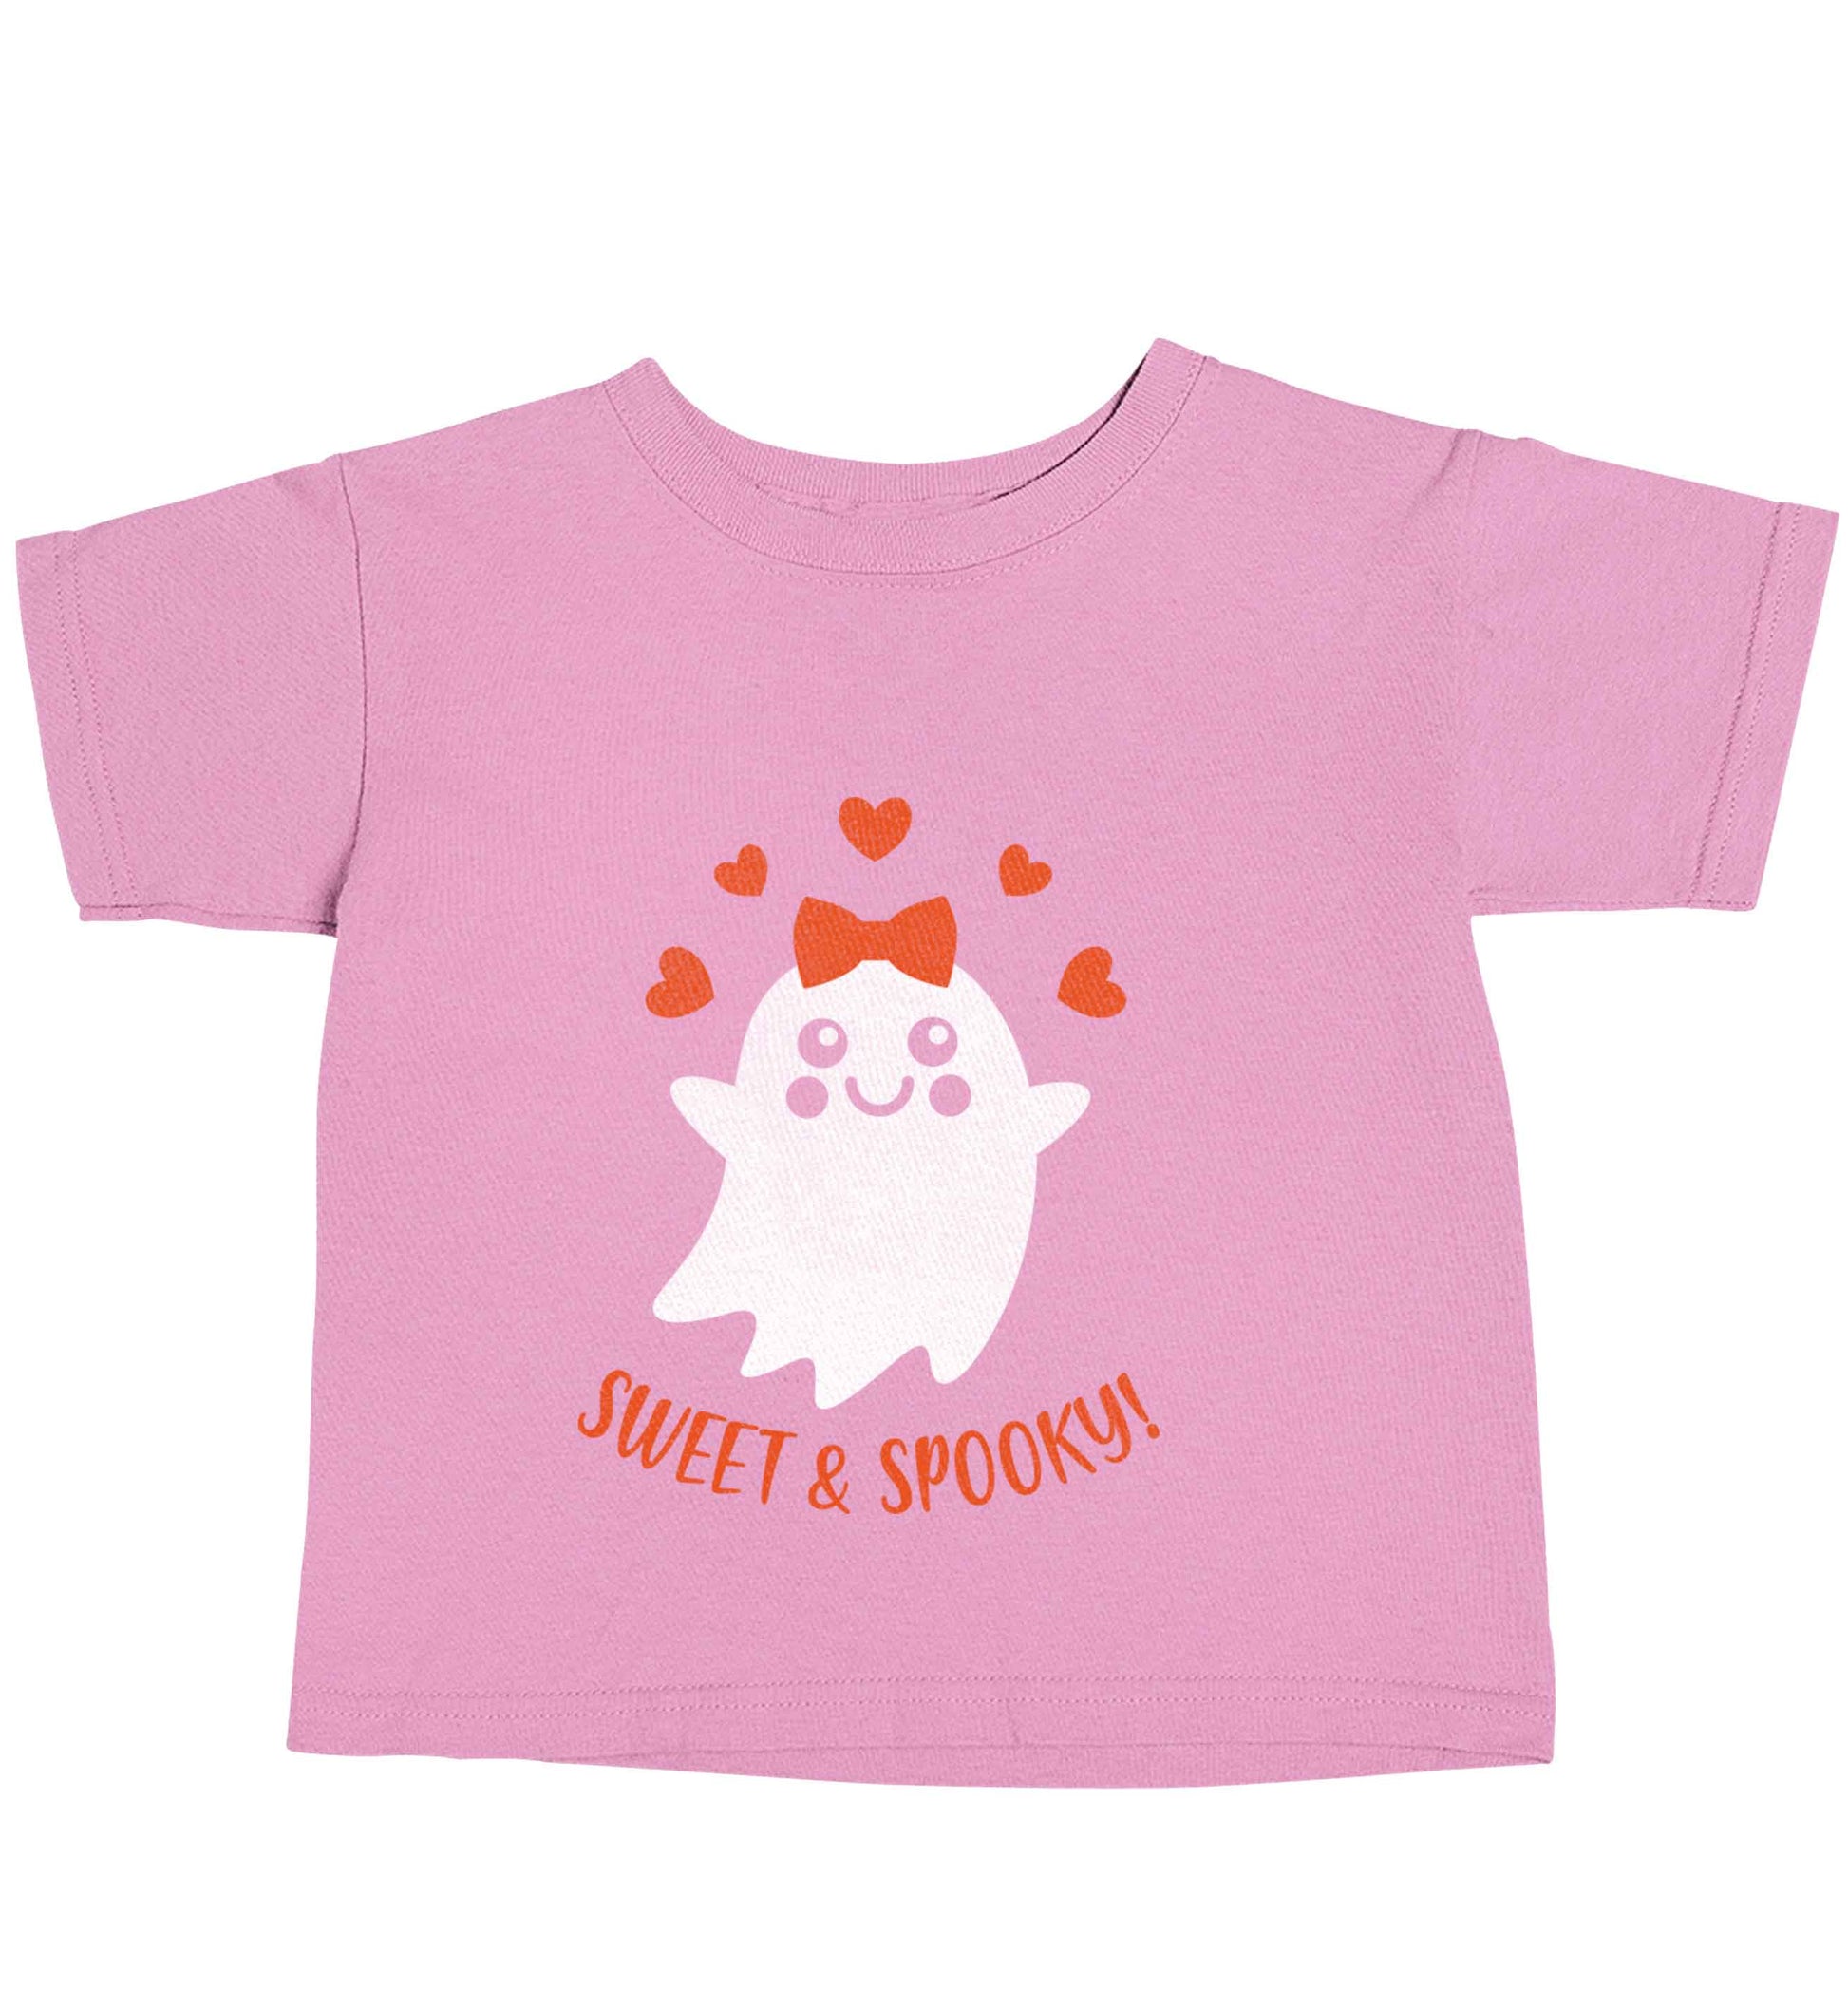 Sweet and spooky light pink baby toddler Tshirt 2 Years